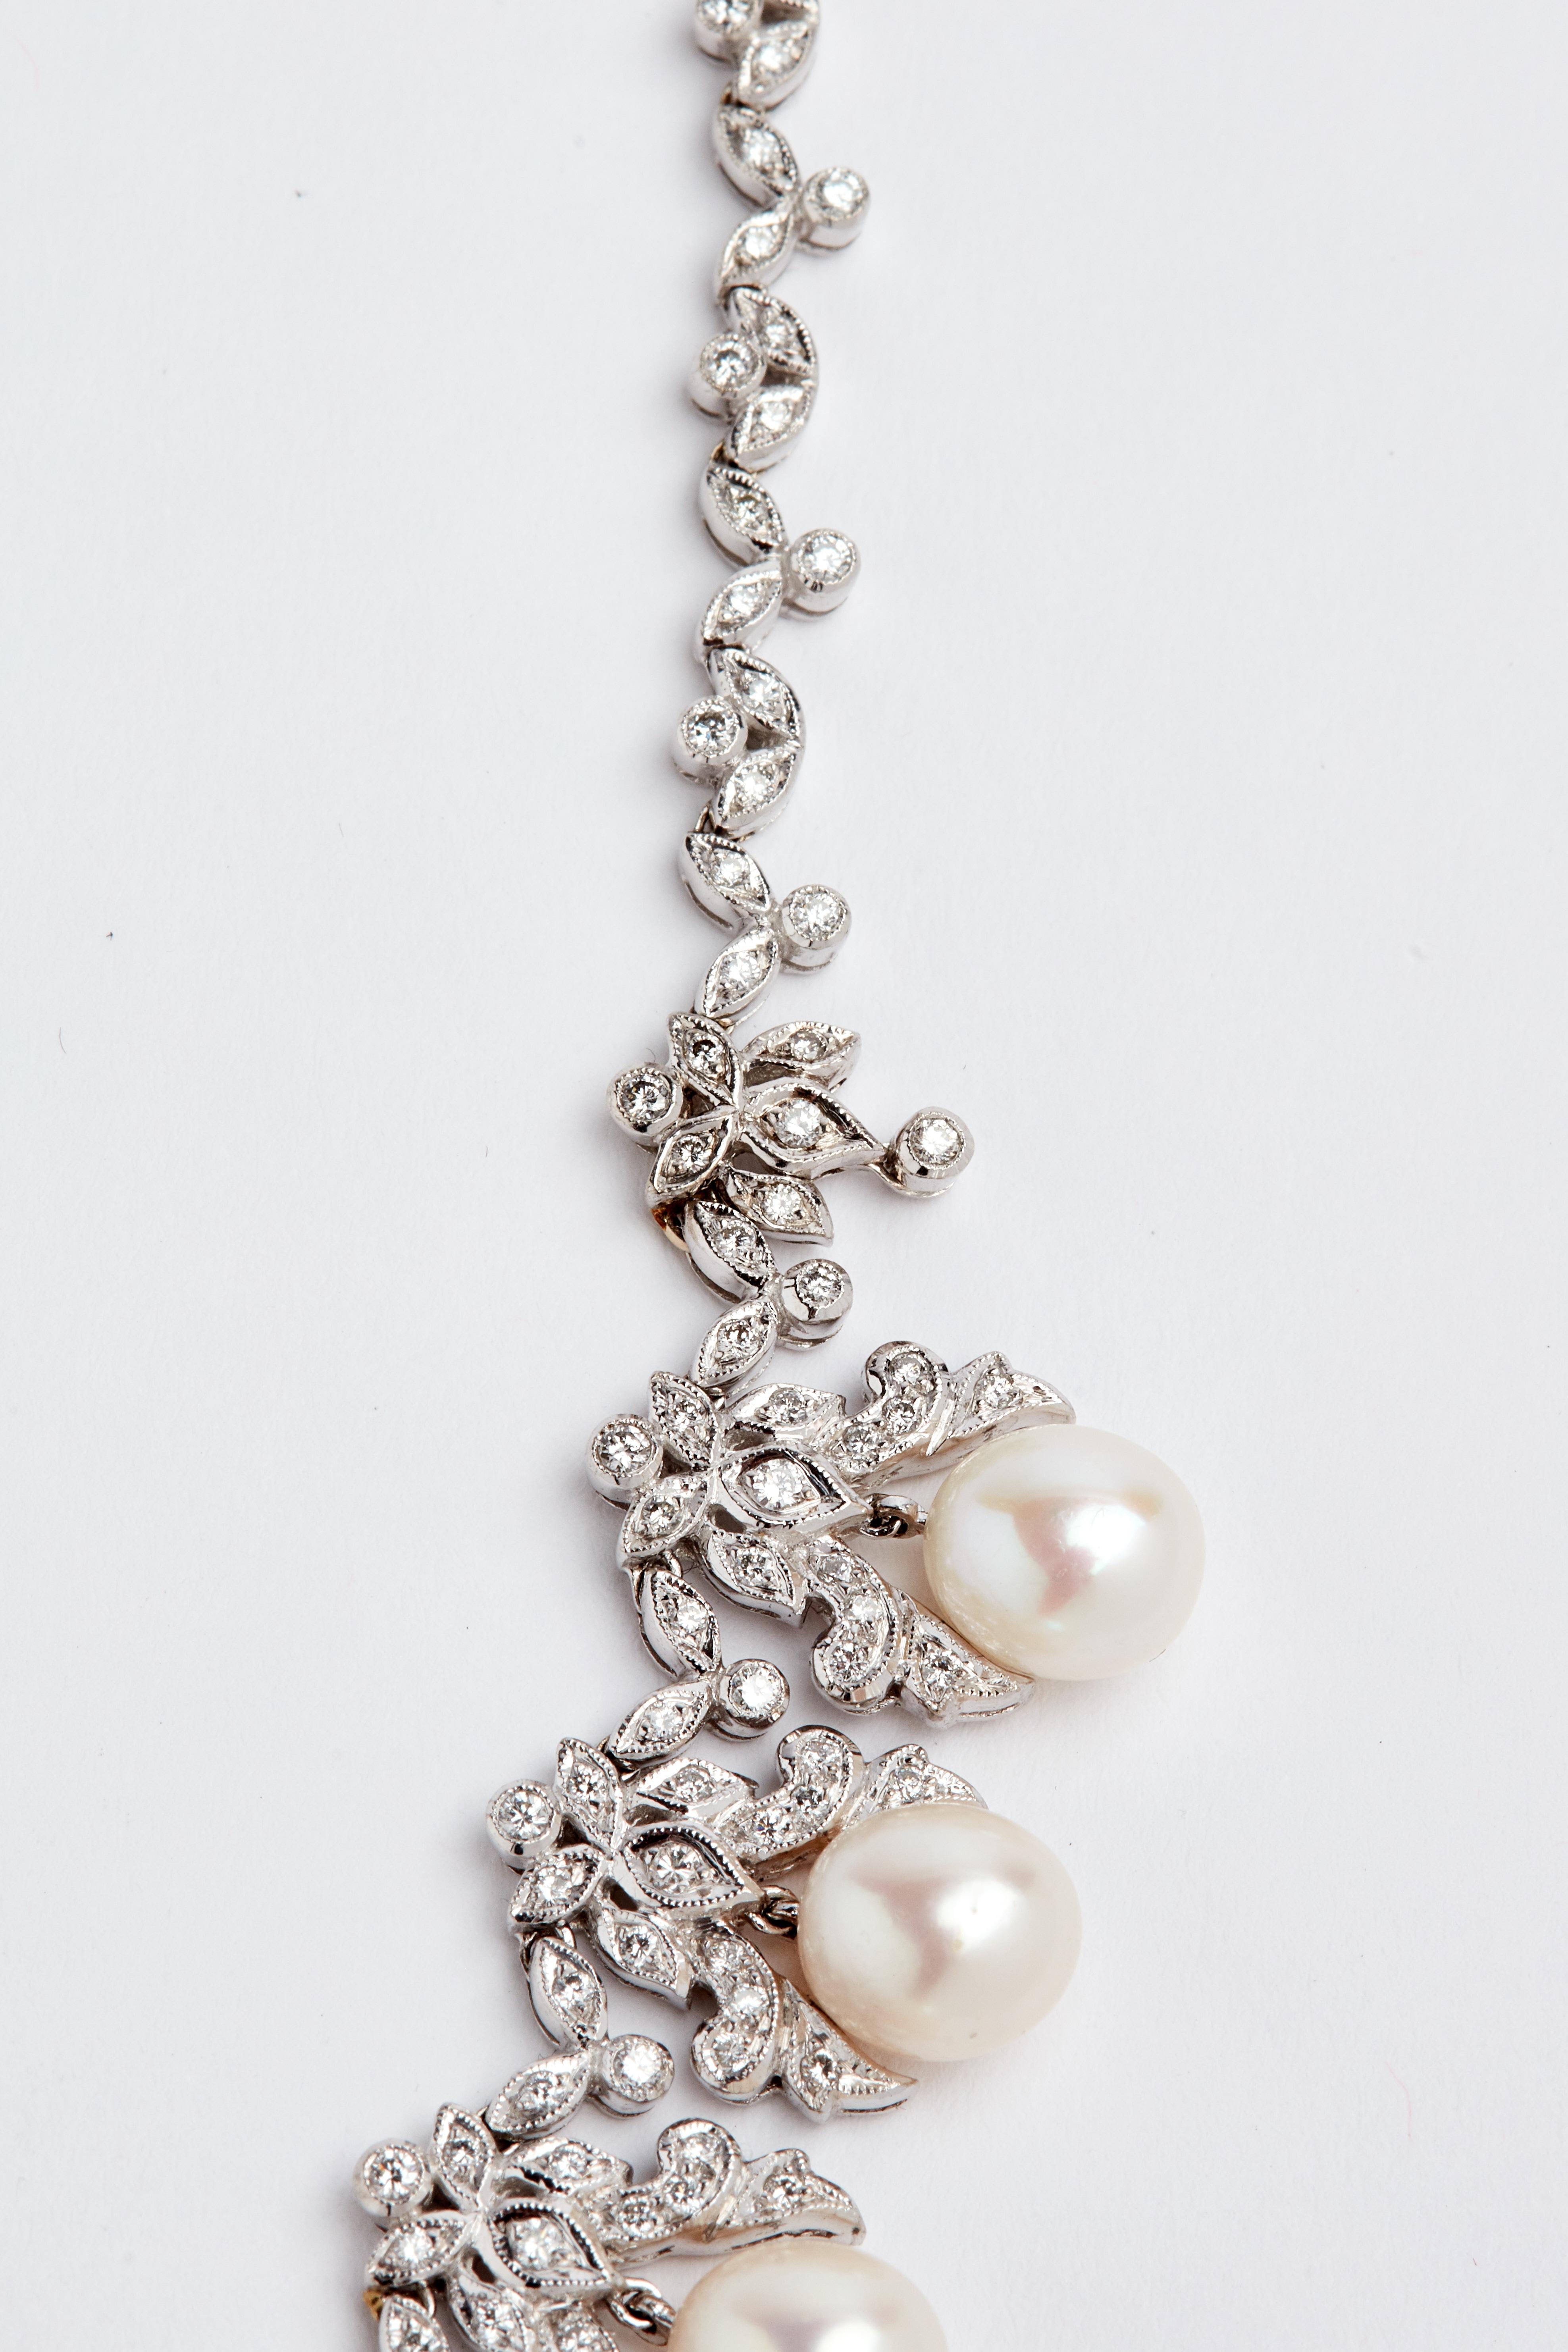 18K Diamond and Cultured Pearl Necklace. Diamonds weighing aprox 3.75 carats. 16 1/4 inch length. 